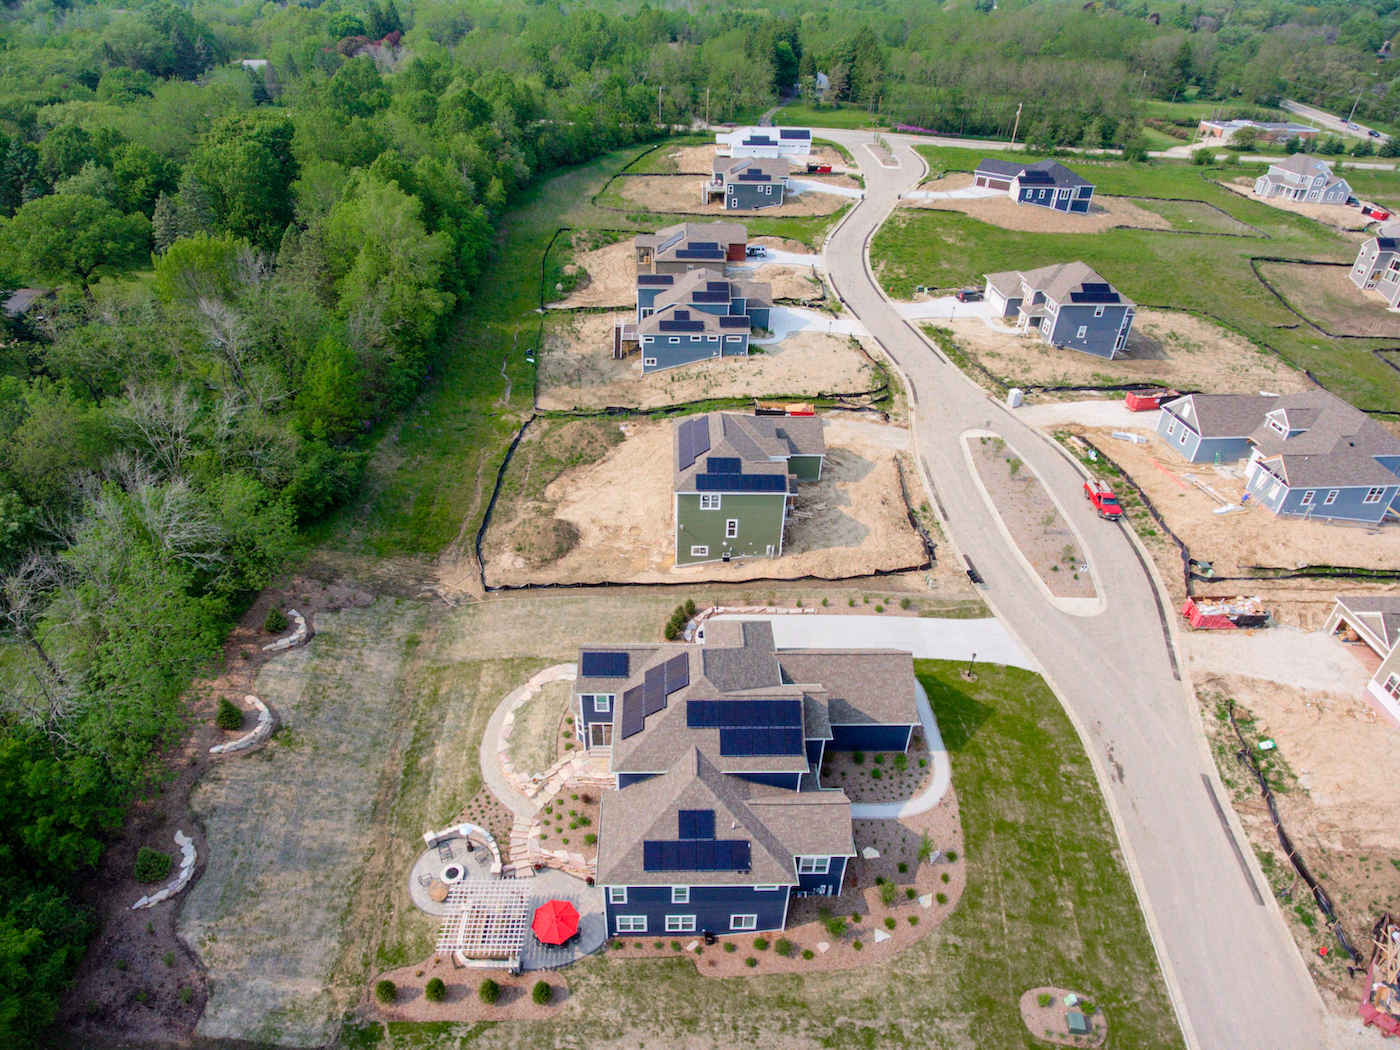 Tim O’Brien Homes at Red Fox Crossing community, New Berlin, Wis. community aerial image